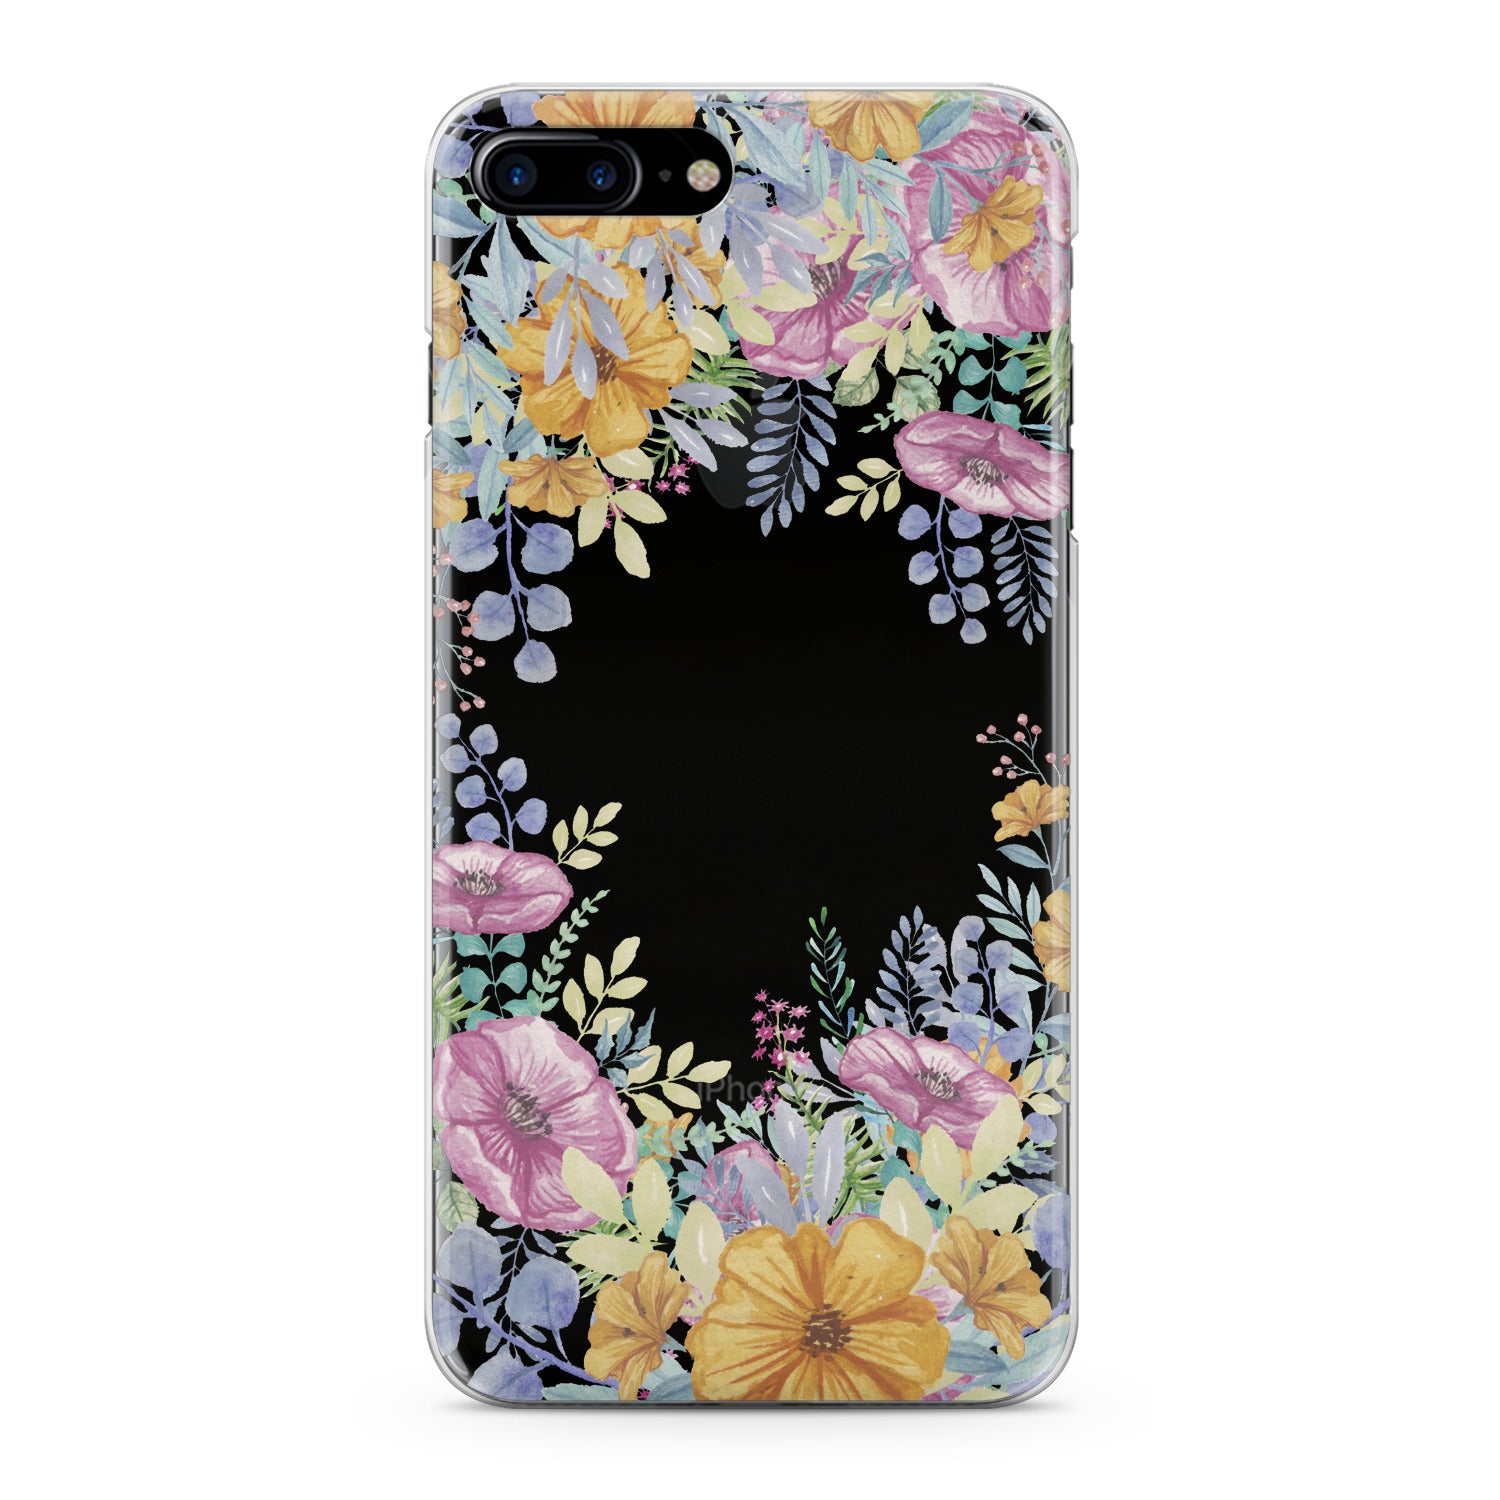 Lex Altern Spring Floral Pattern Phone Case for your iPhone & Android phone.